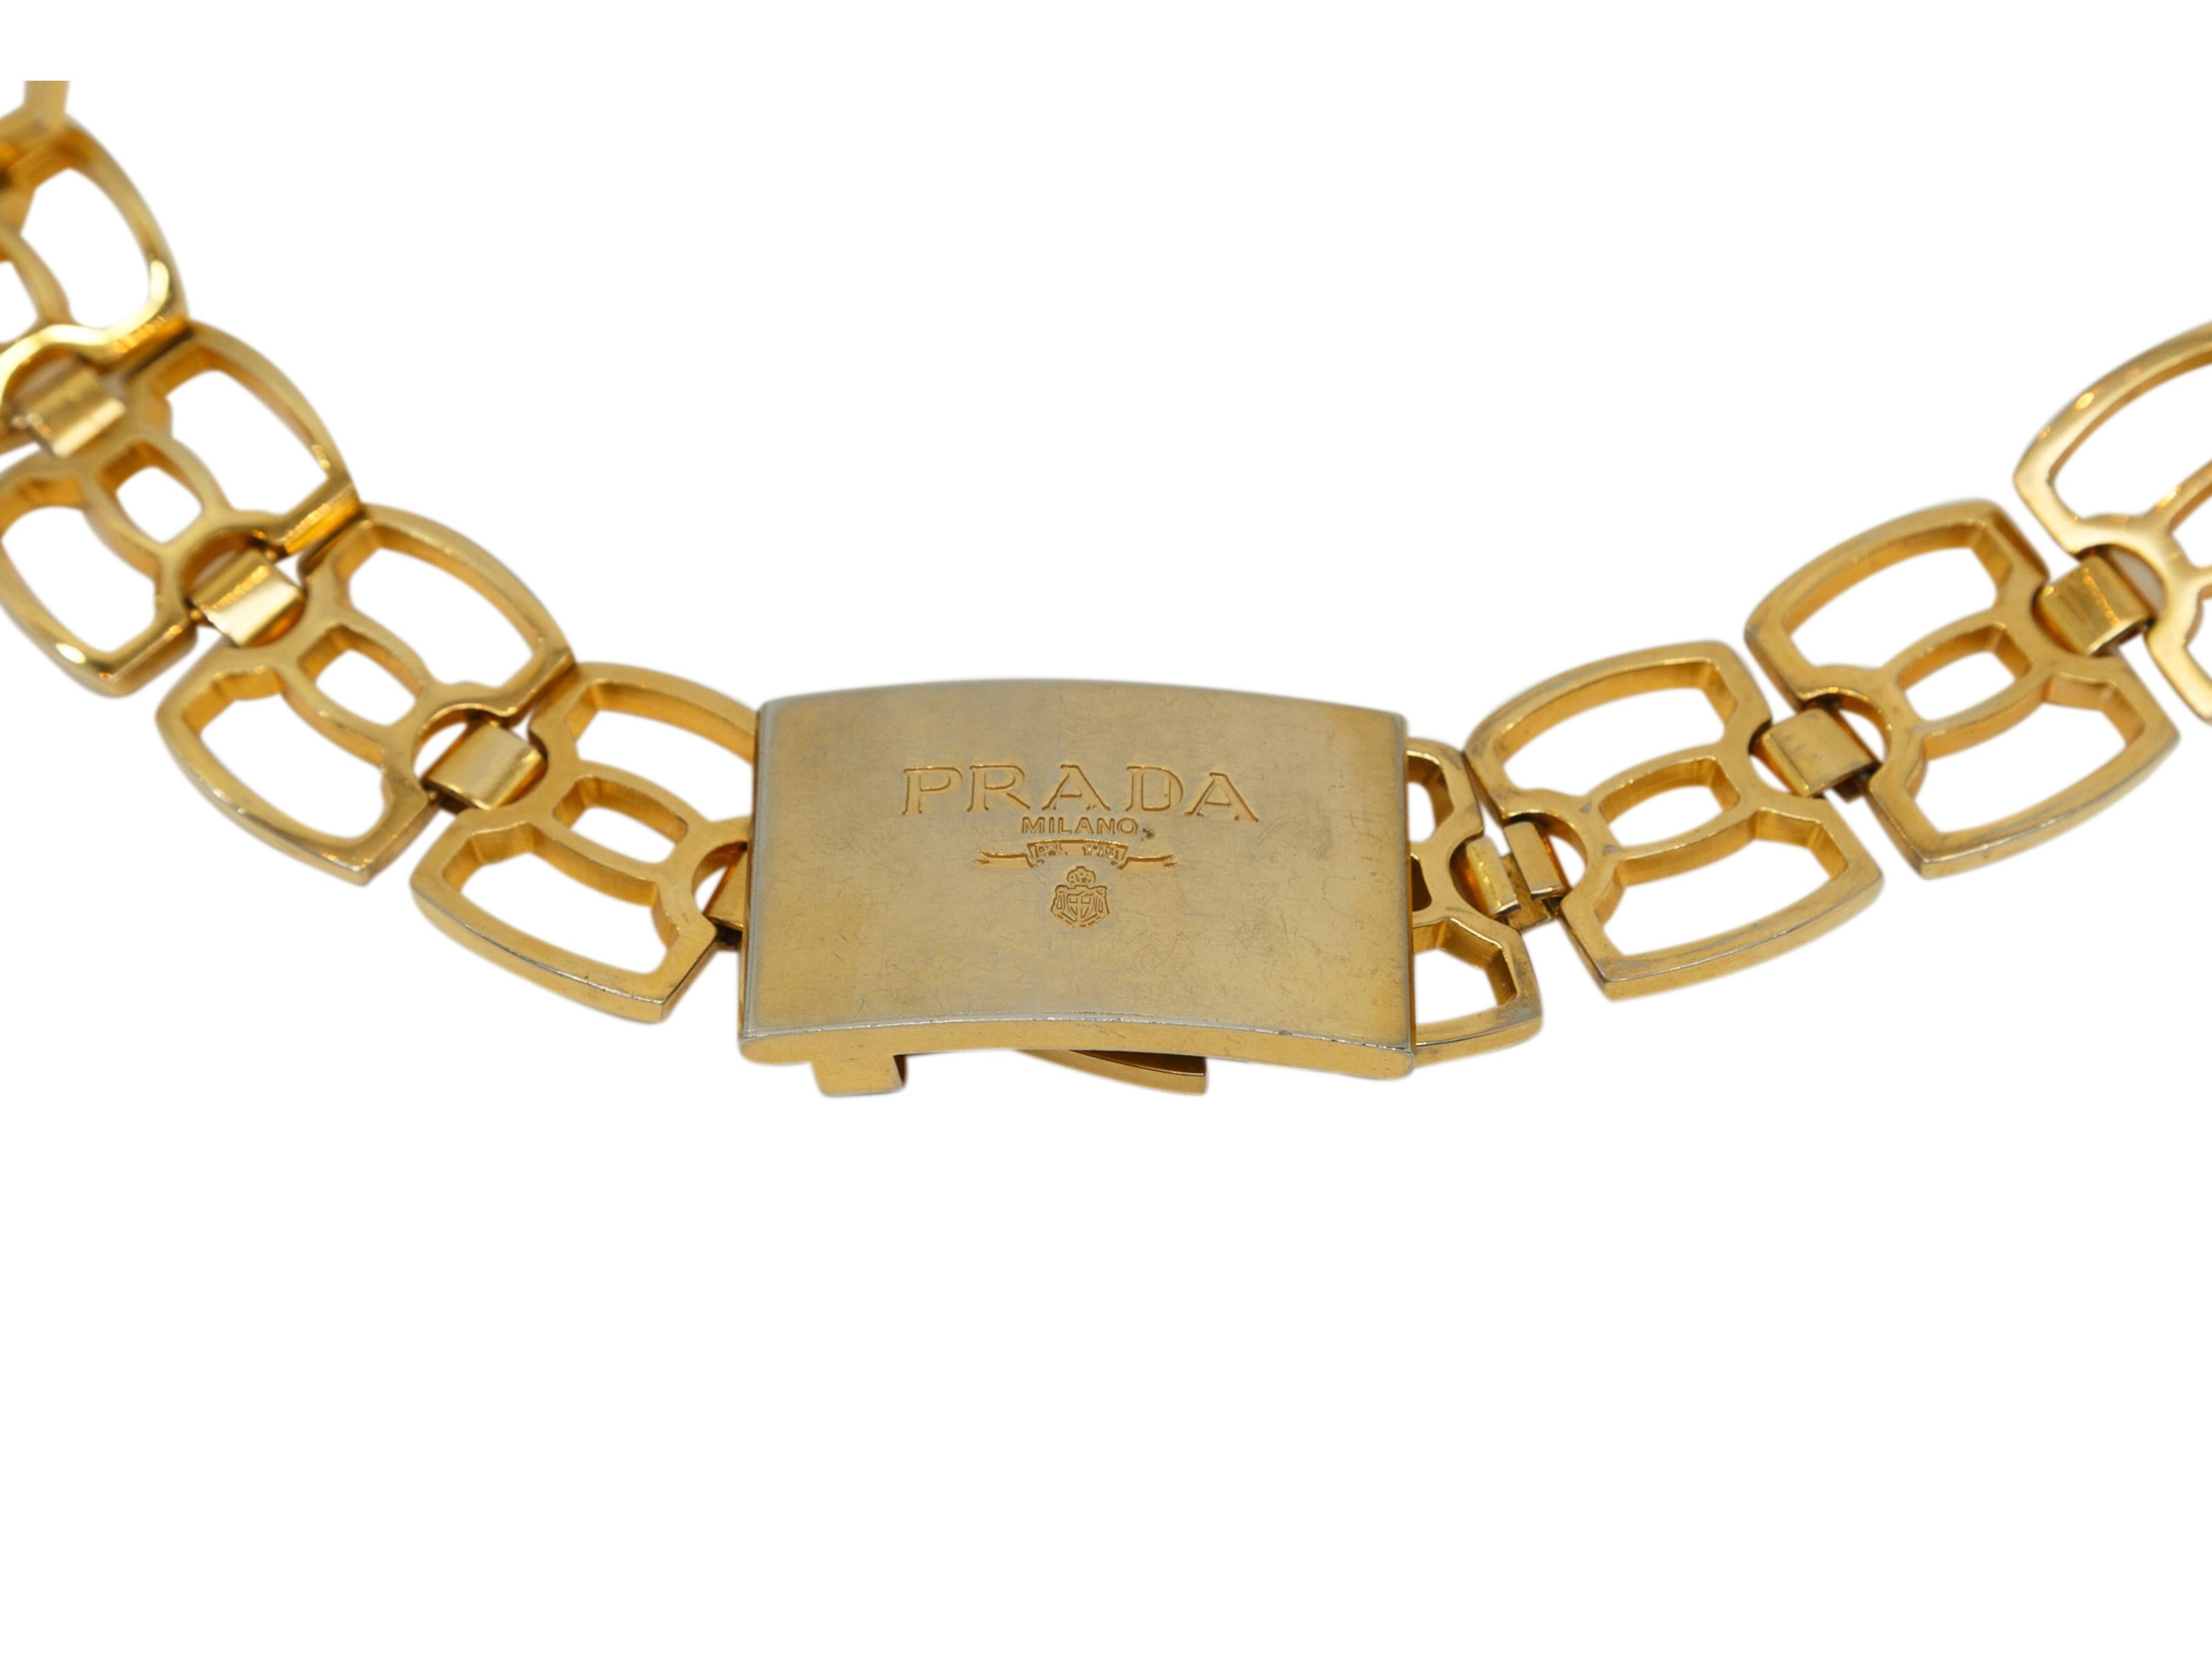 Product details: Vintage gold-tone chain belt by Prada. Brand logo at front hook closure. 35